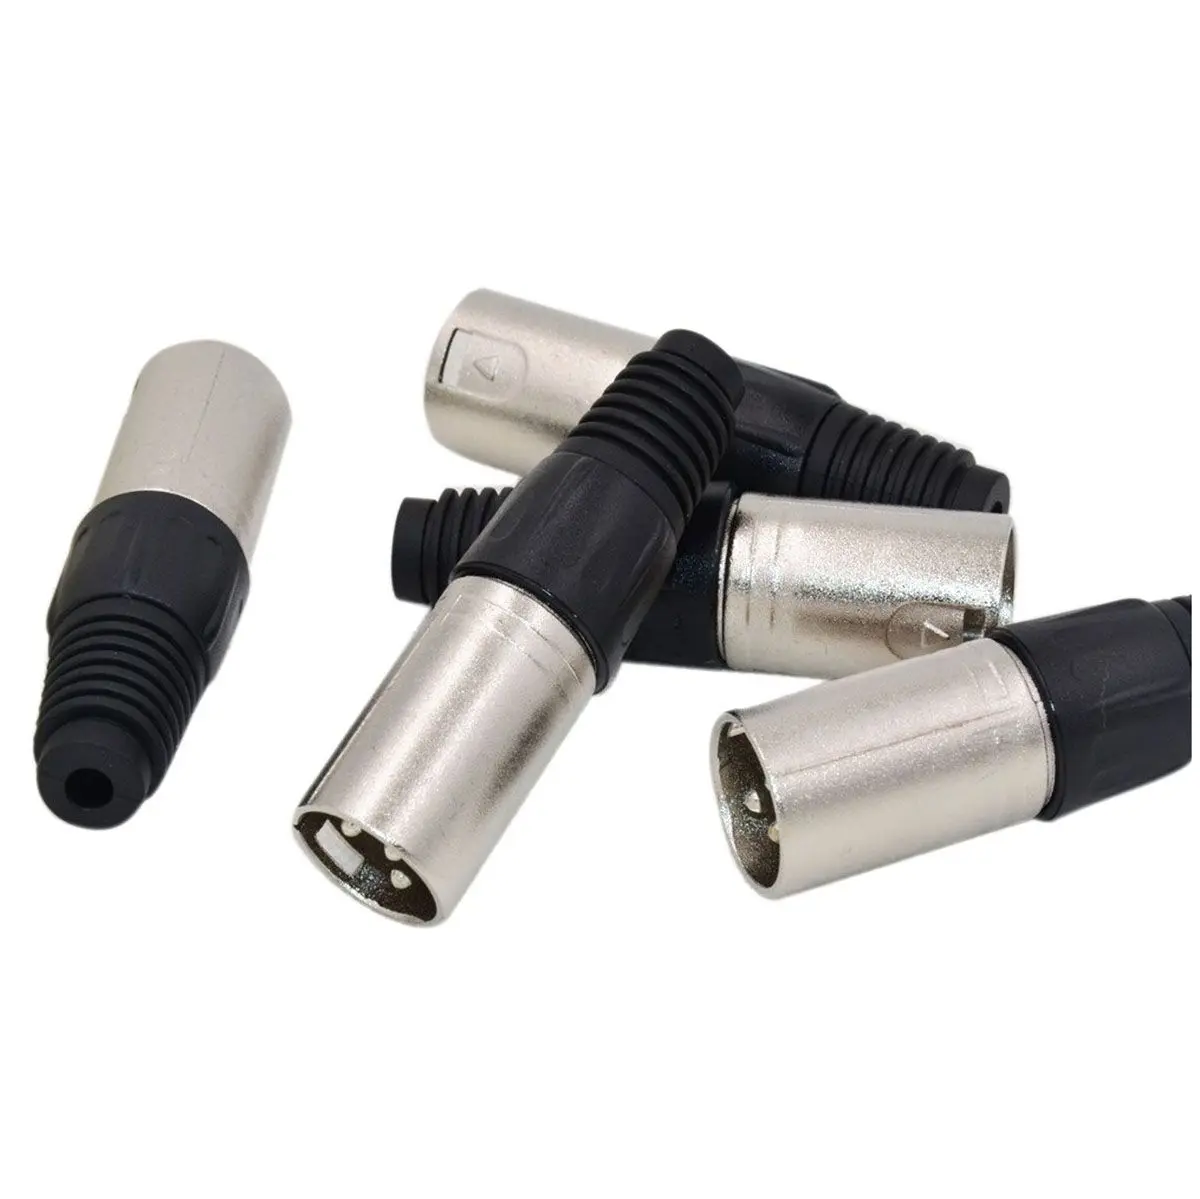 

THGS 10Pcs 3 Pin XLR Solder Type Connector 5 Male + 5 Female Plug Cable Connector Microphone Audio Socket